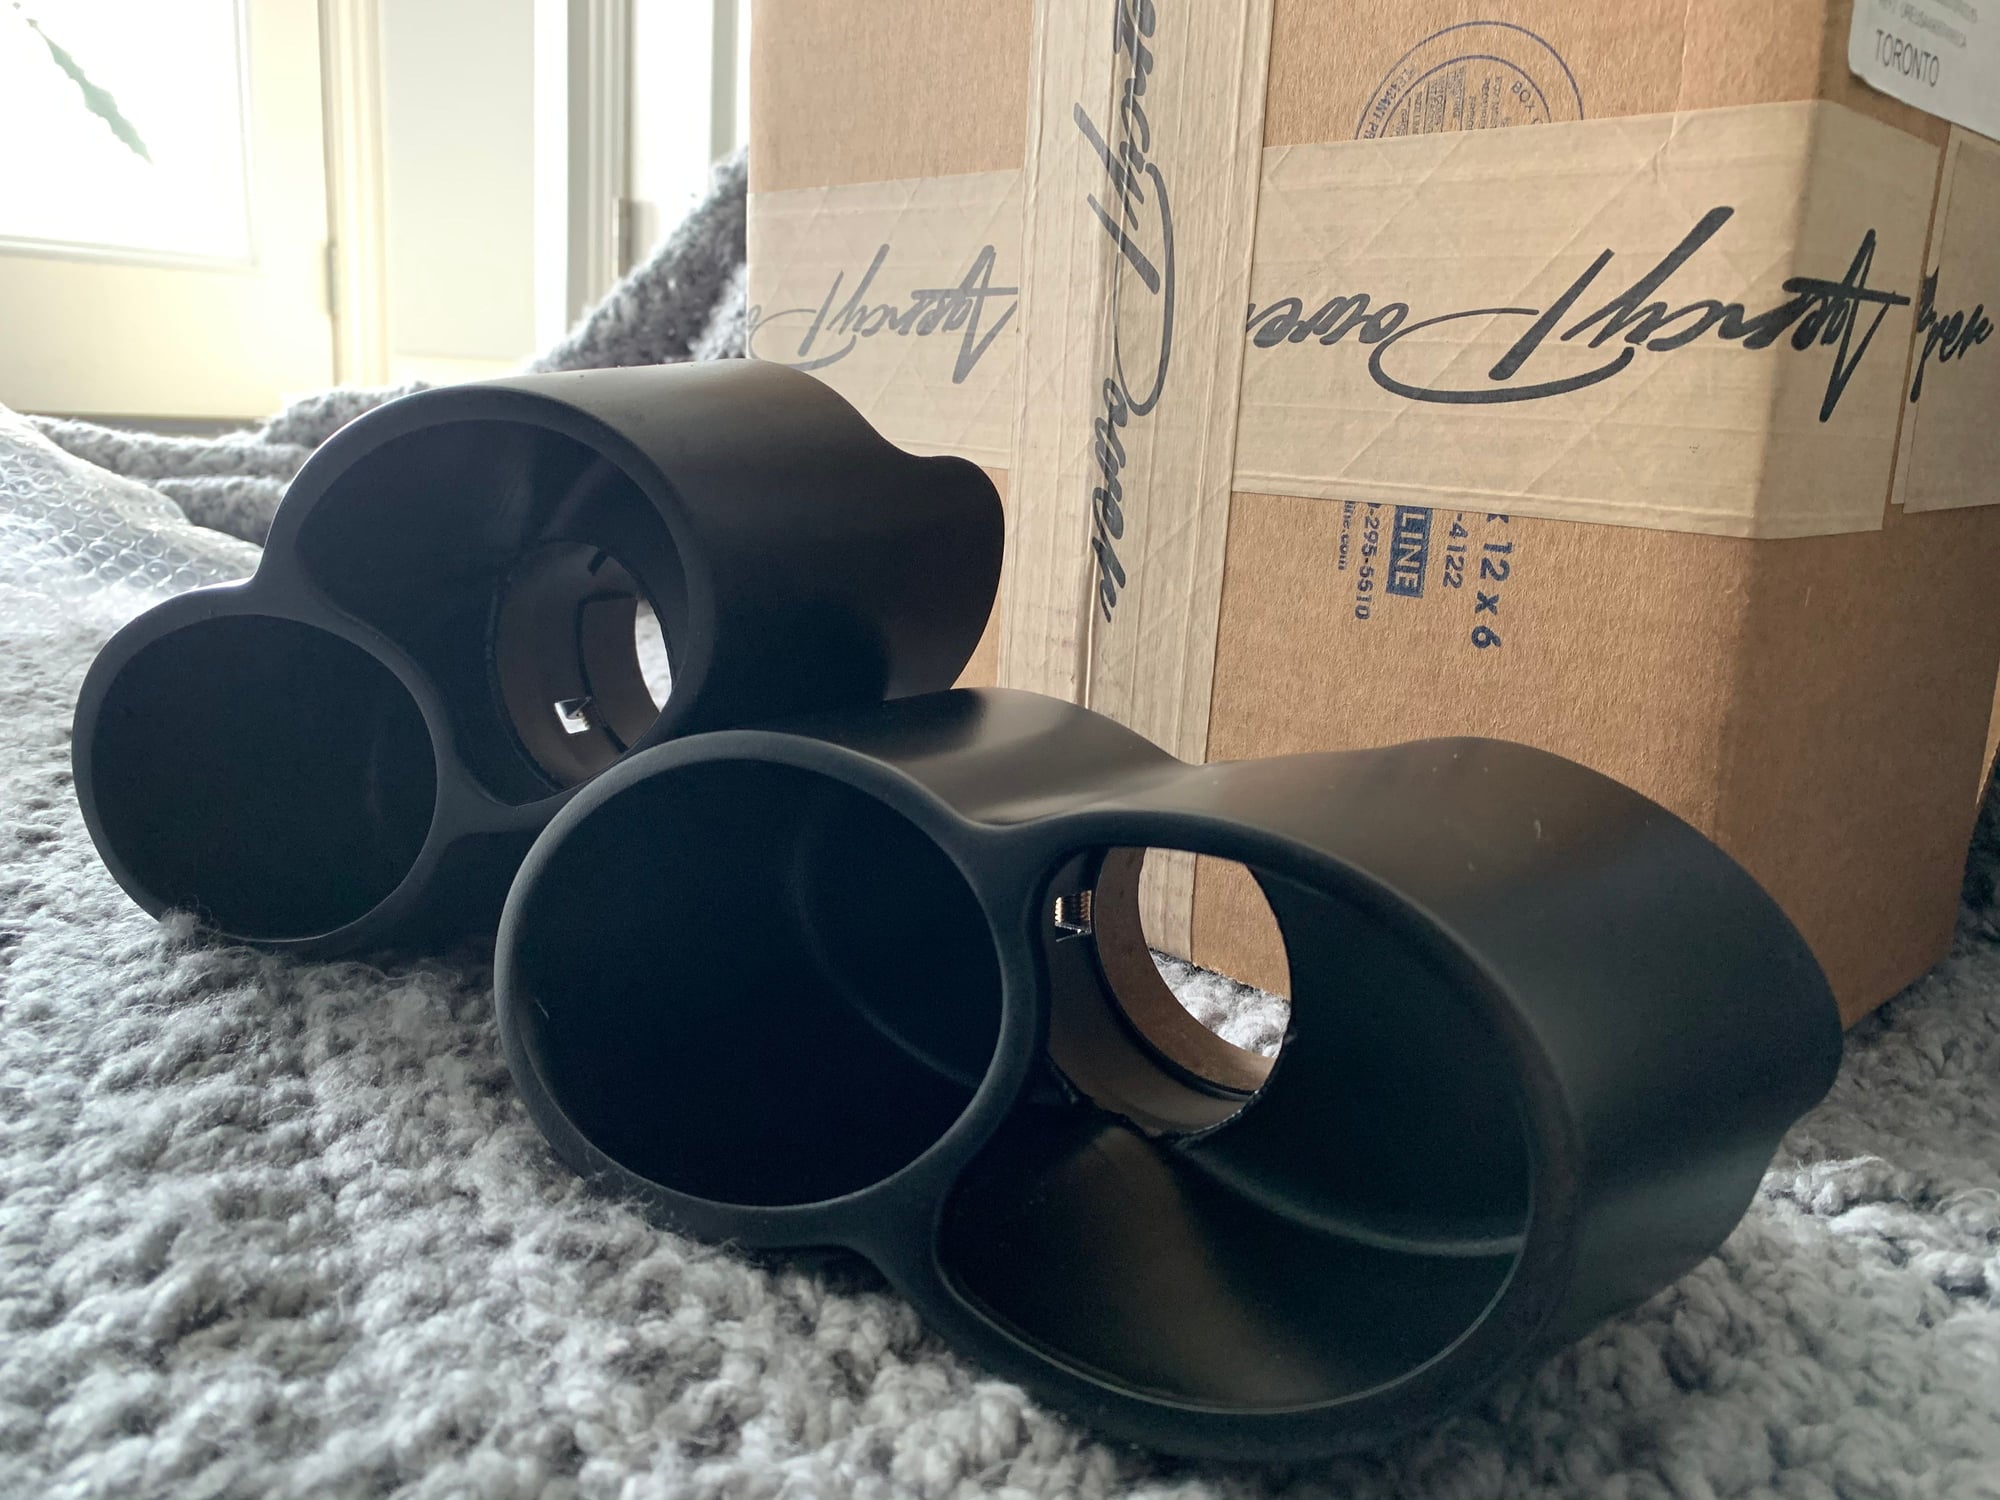 Engine - Exhaust - Agency Power Exhaust Tips (Brand New) - New - 2006 to 2011 Porsche All Models - Brampton, ON L6Y6C5, Canada